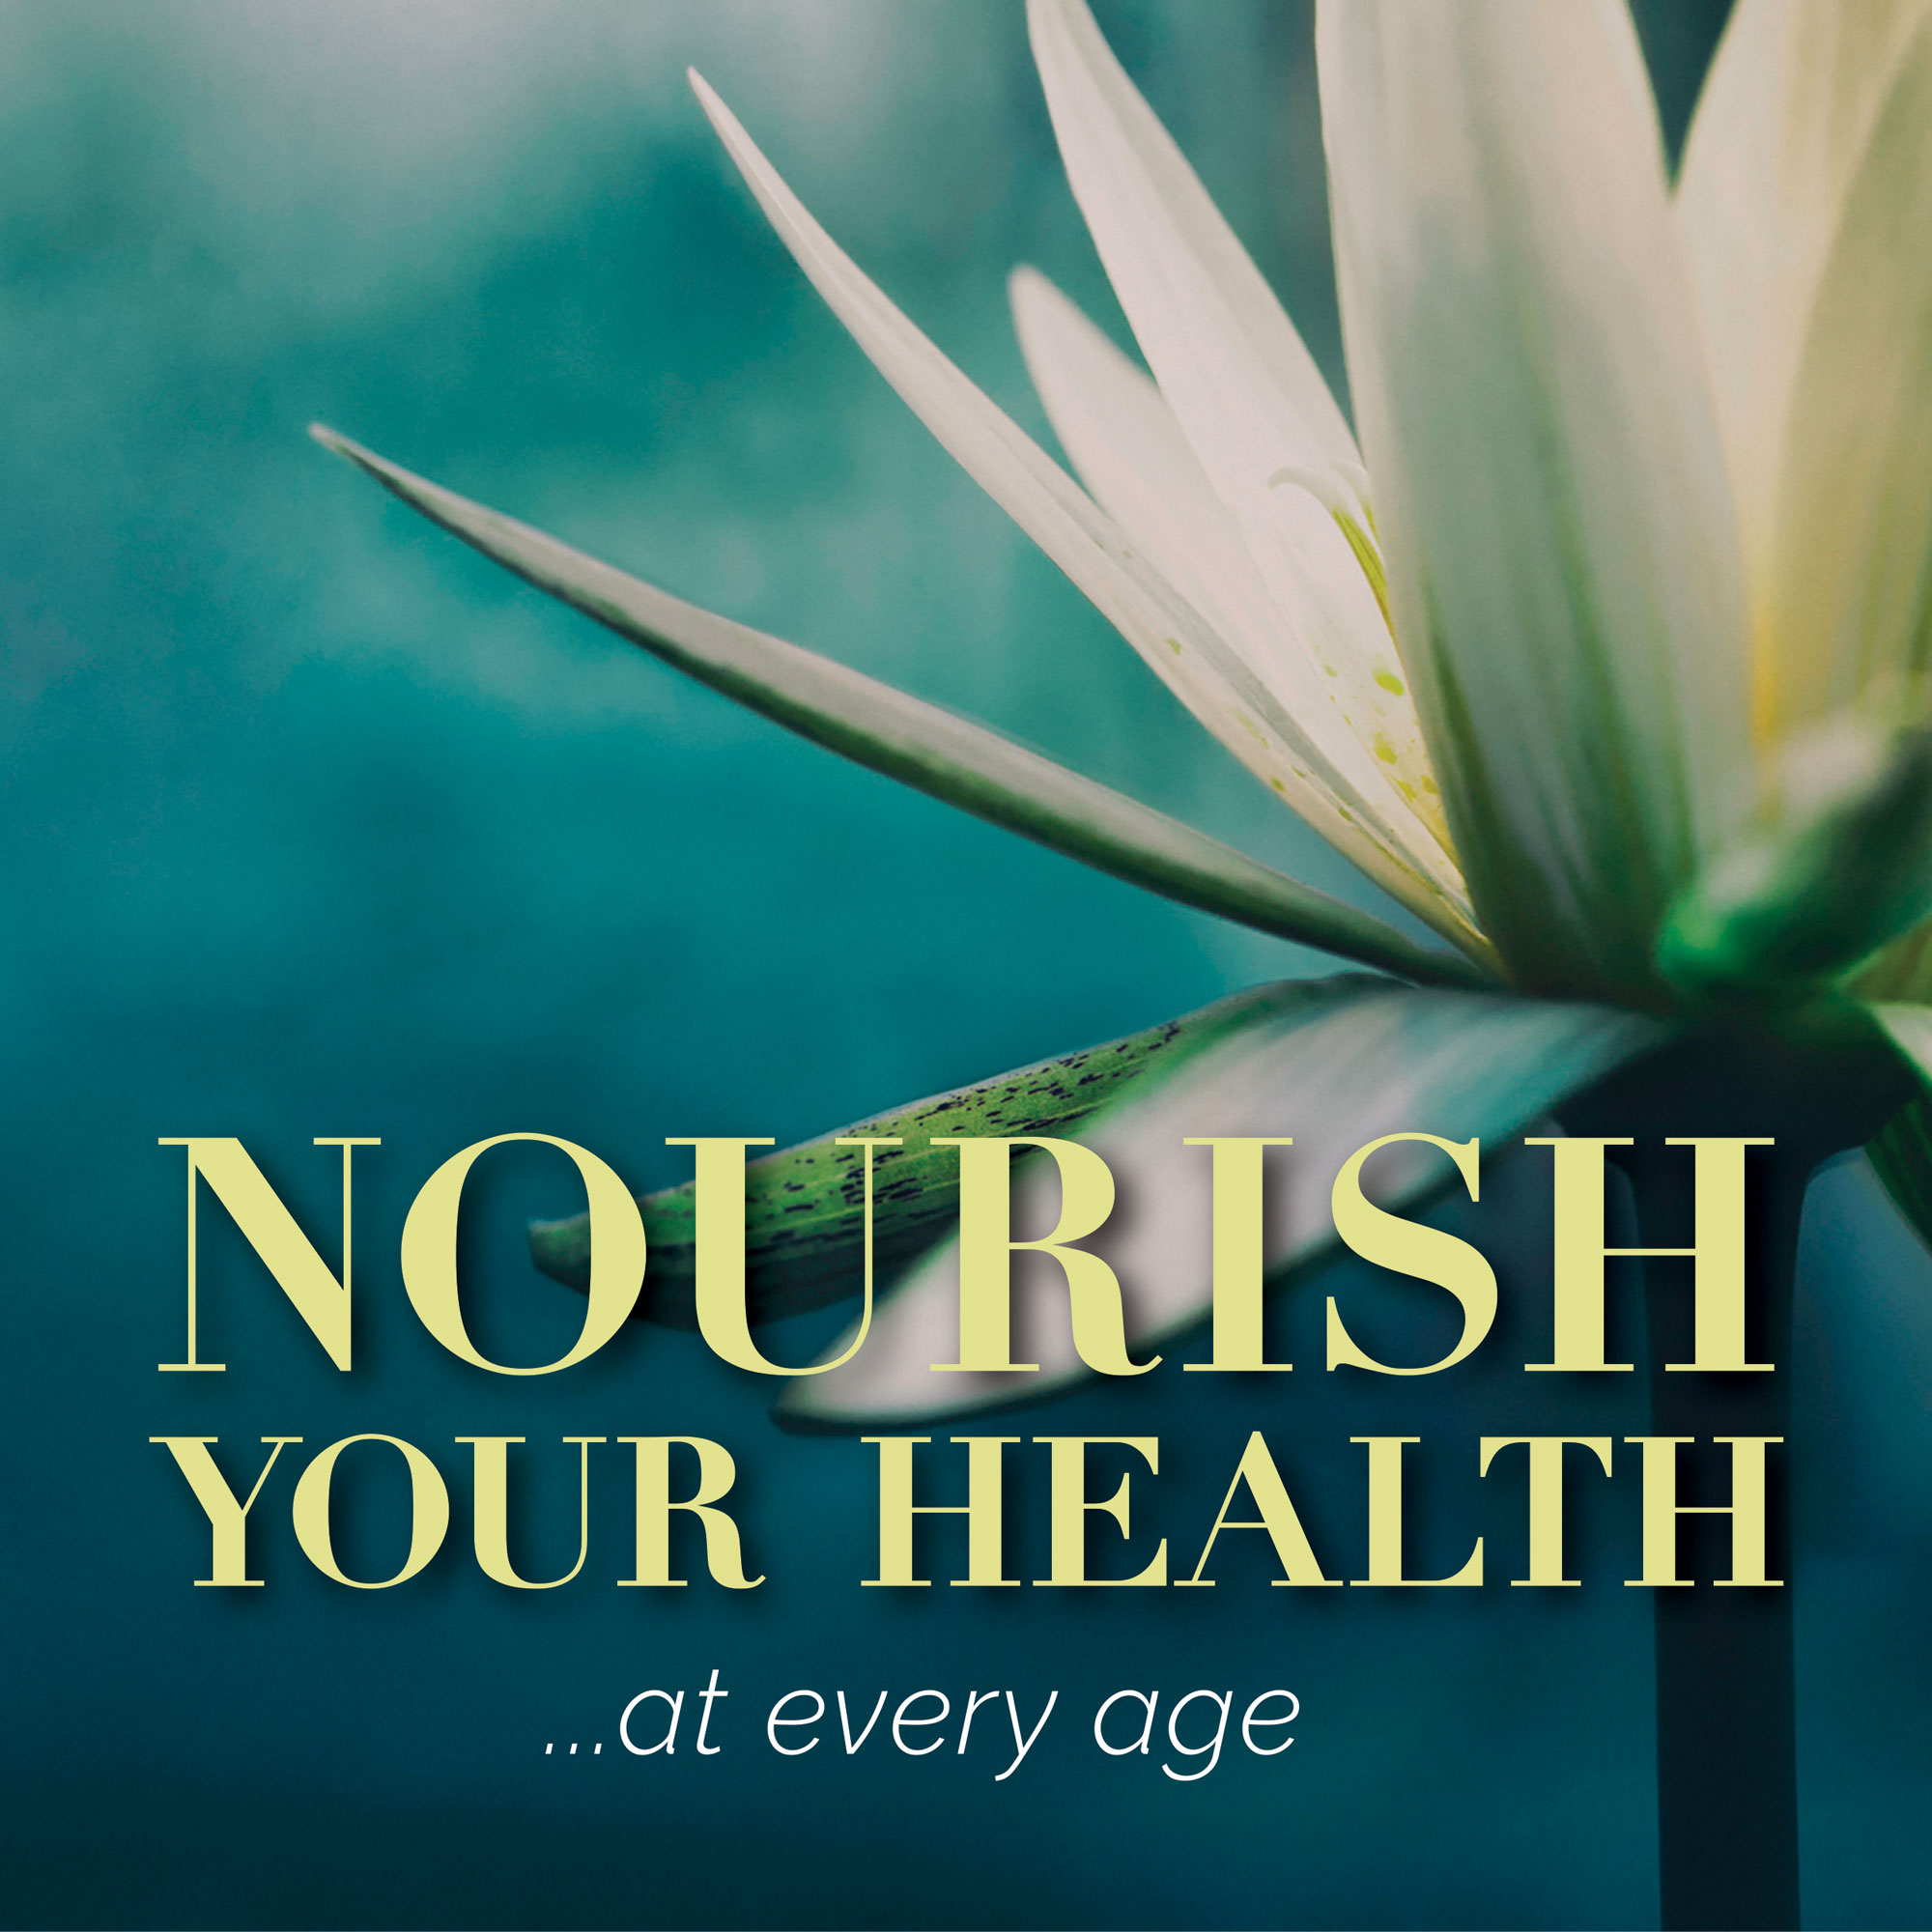 Nourish Your Health at every age